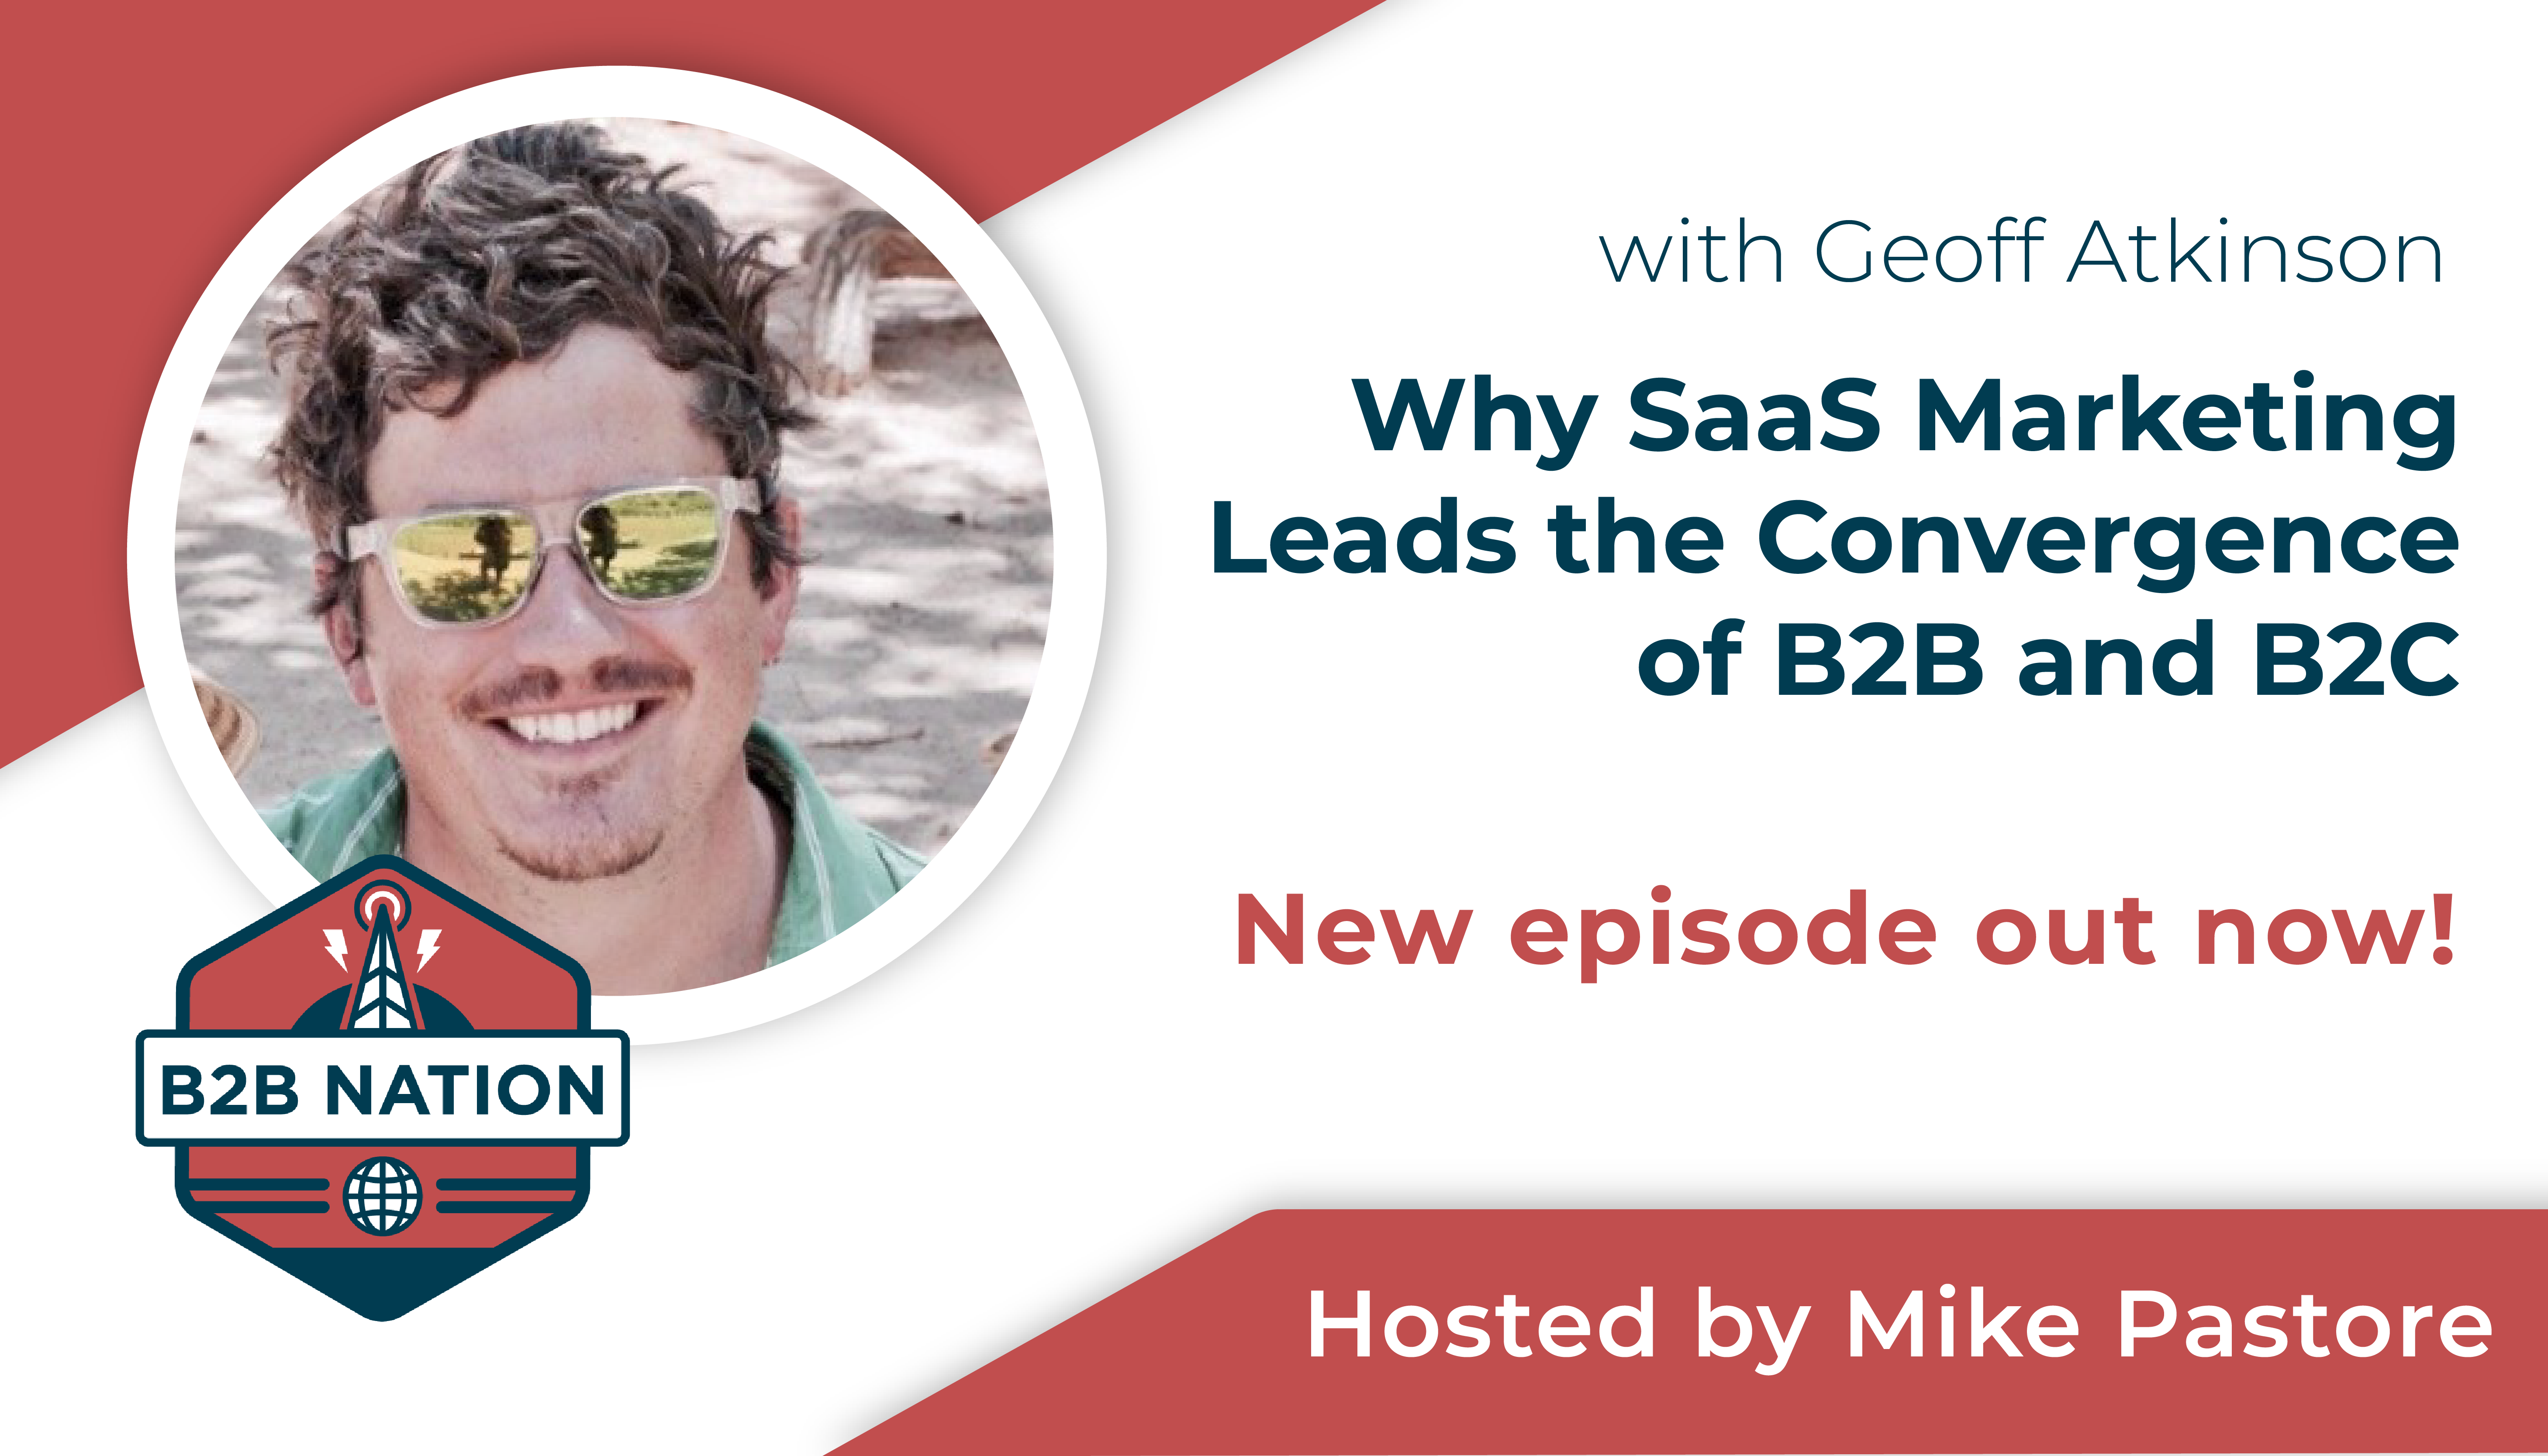 Why SaaS Marketing Leads the Convergence of B2B and B2C